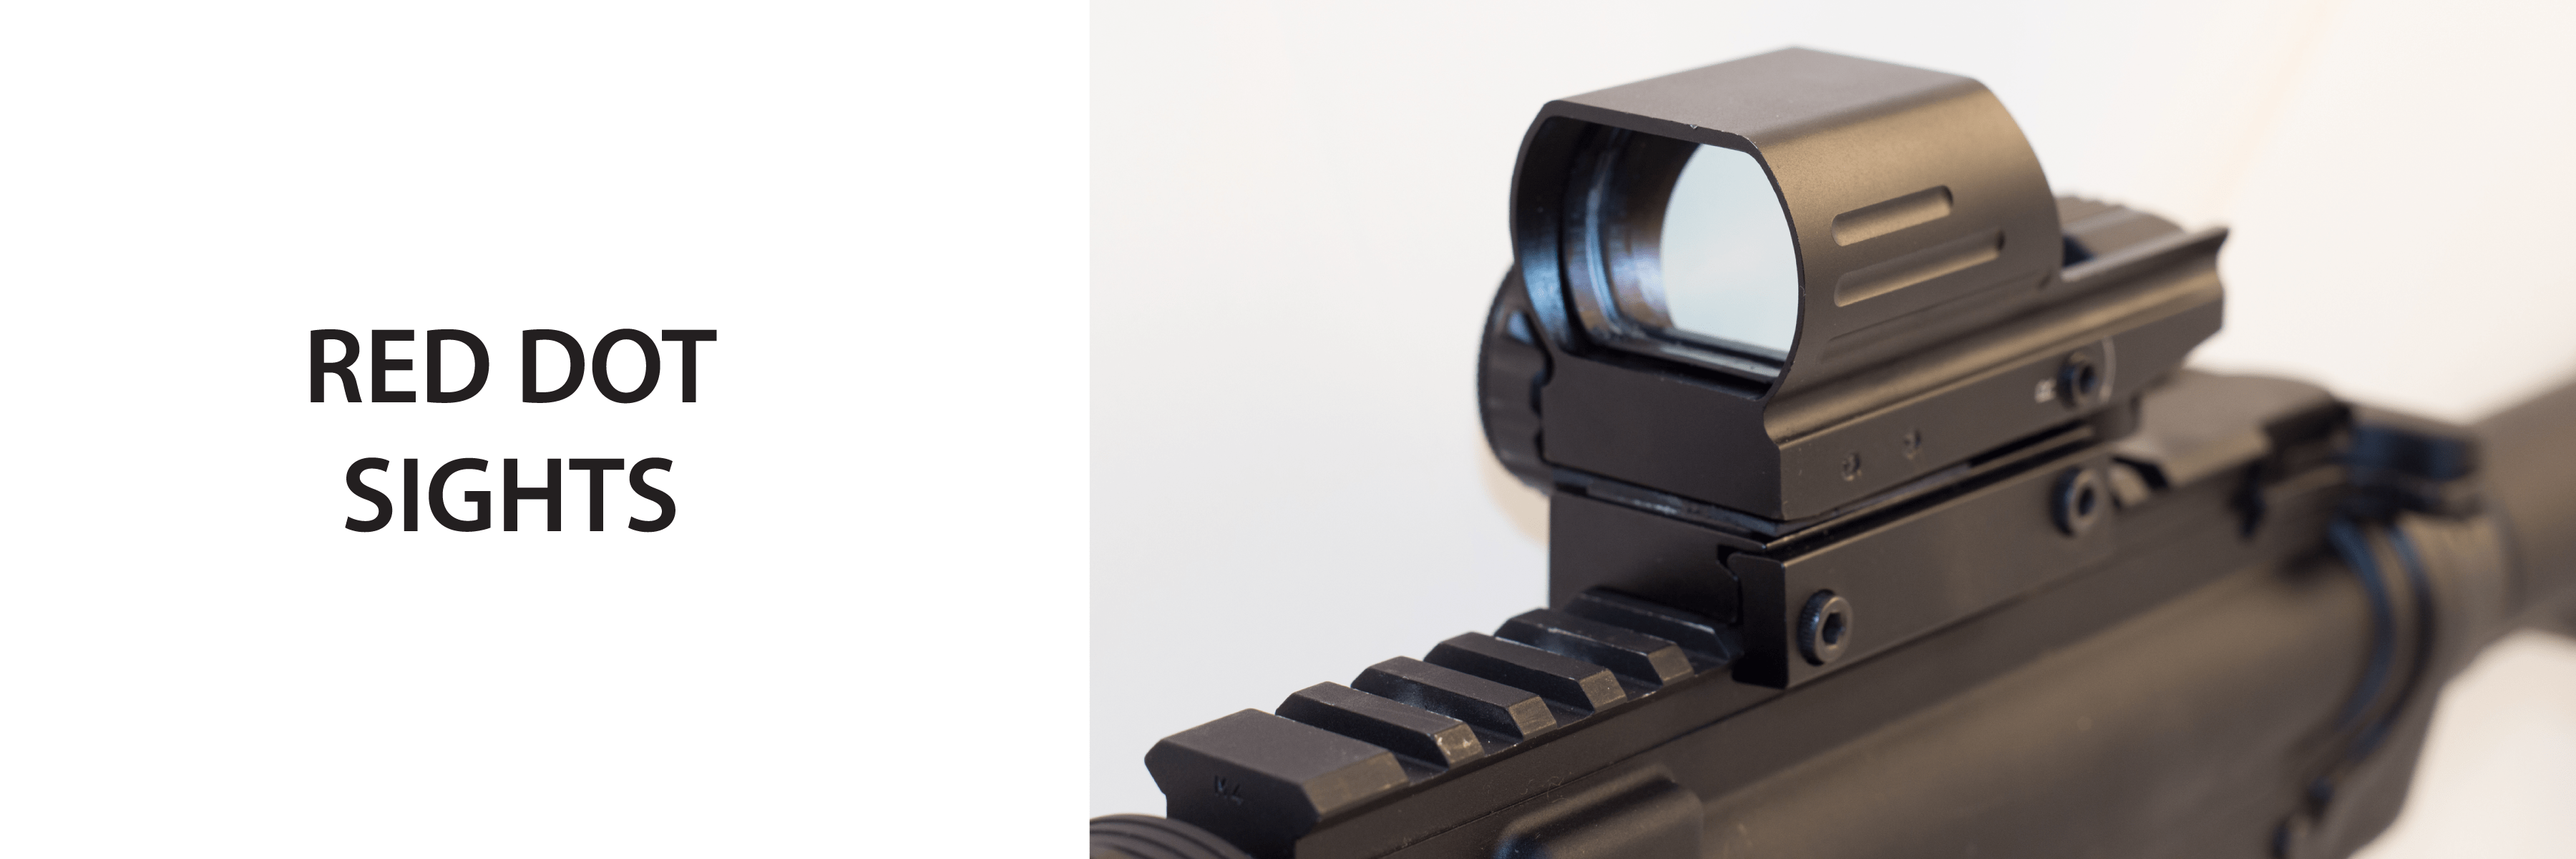 Shepherd Red Dot Reflex Sights Now Available for AR 15 and Glock